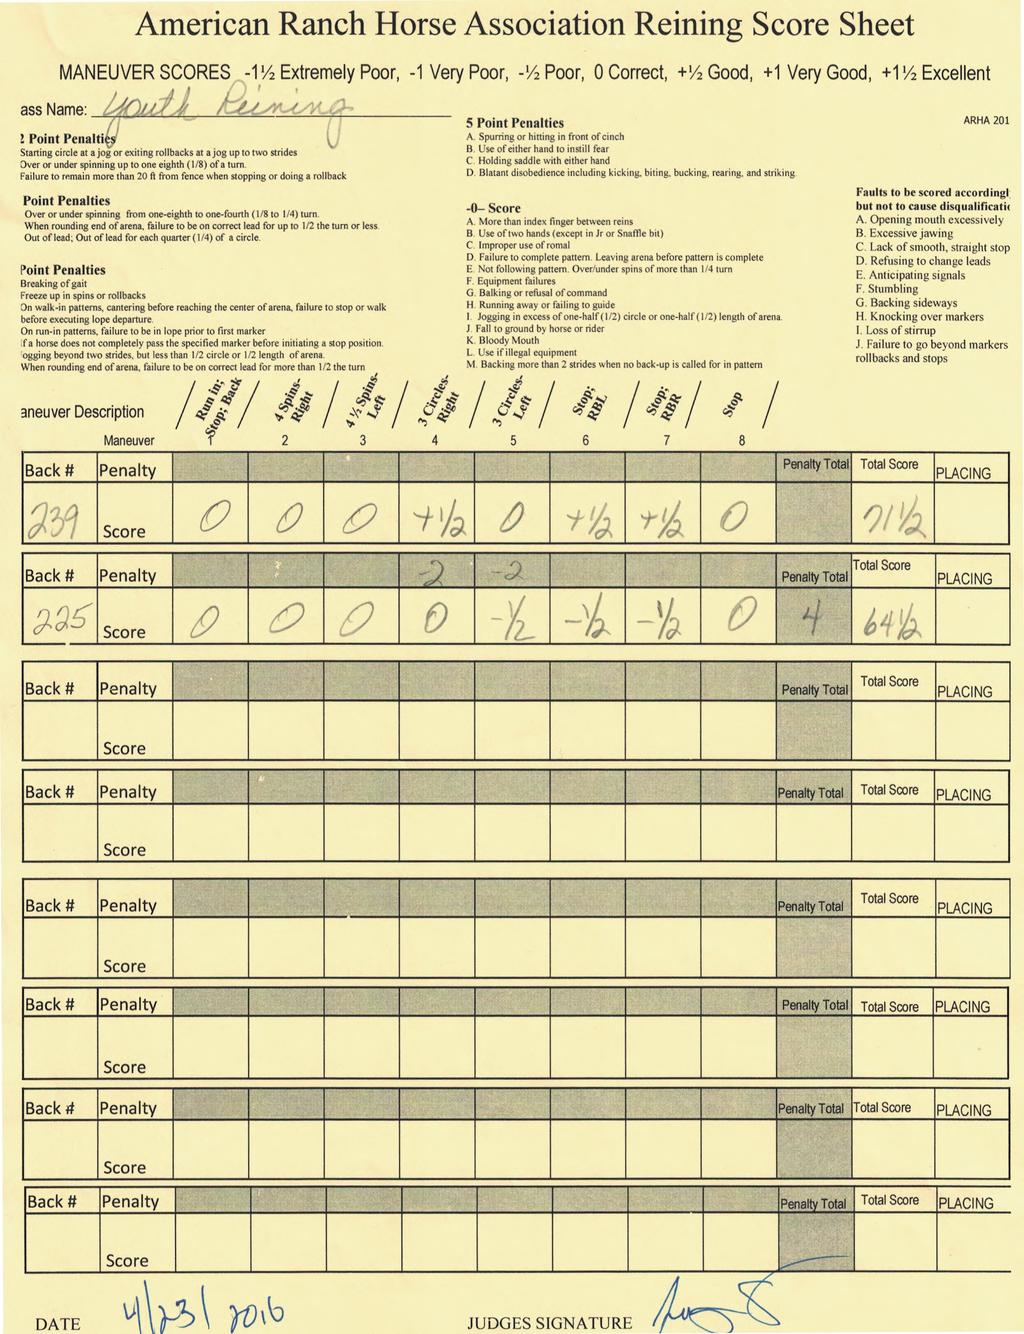 DATE American Ranch Horse Association Reining Sheet JUDGES SIGNATURE MANEUVER SCORES, -1 '/2 Extremely Poor, -1 Very Poor, -V2 Poor, 0 Correct, + '/2 Good, +1 Very Good, +1 1/2 Excellent ass Name: